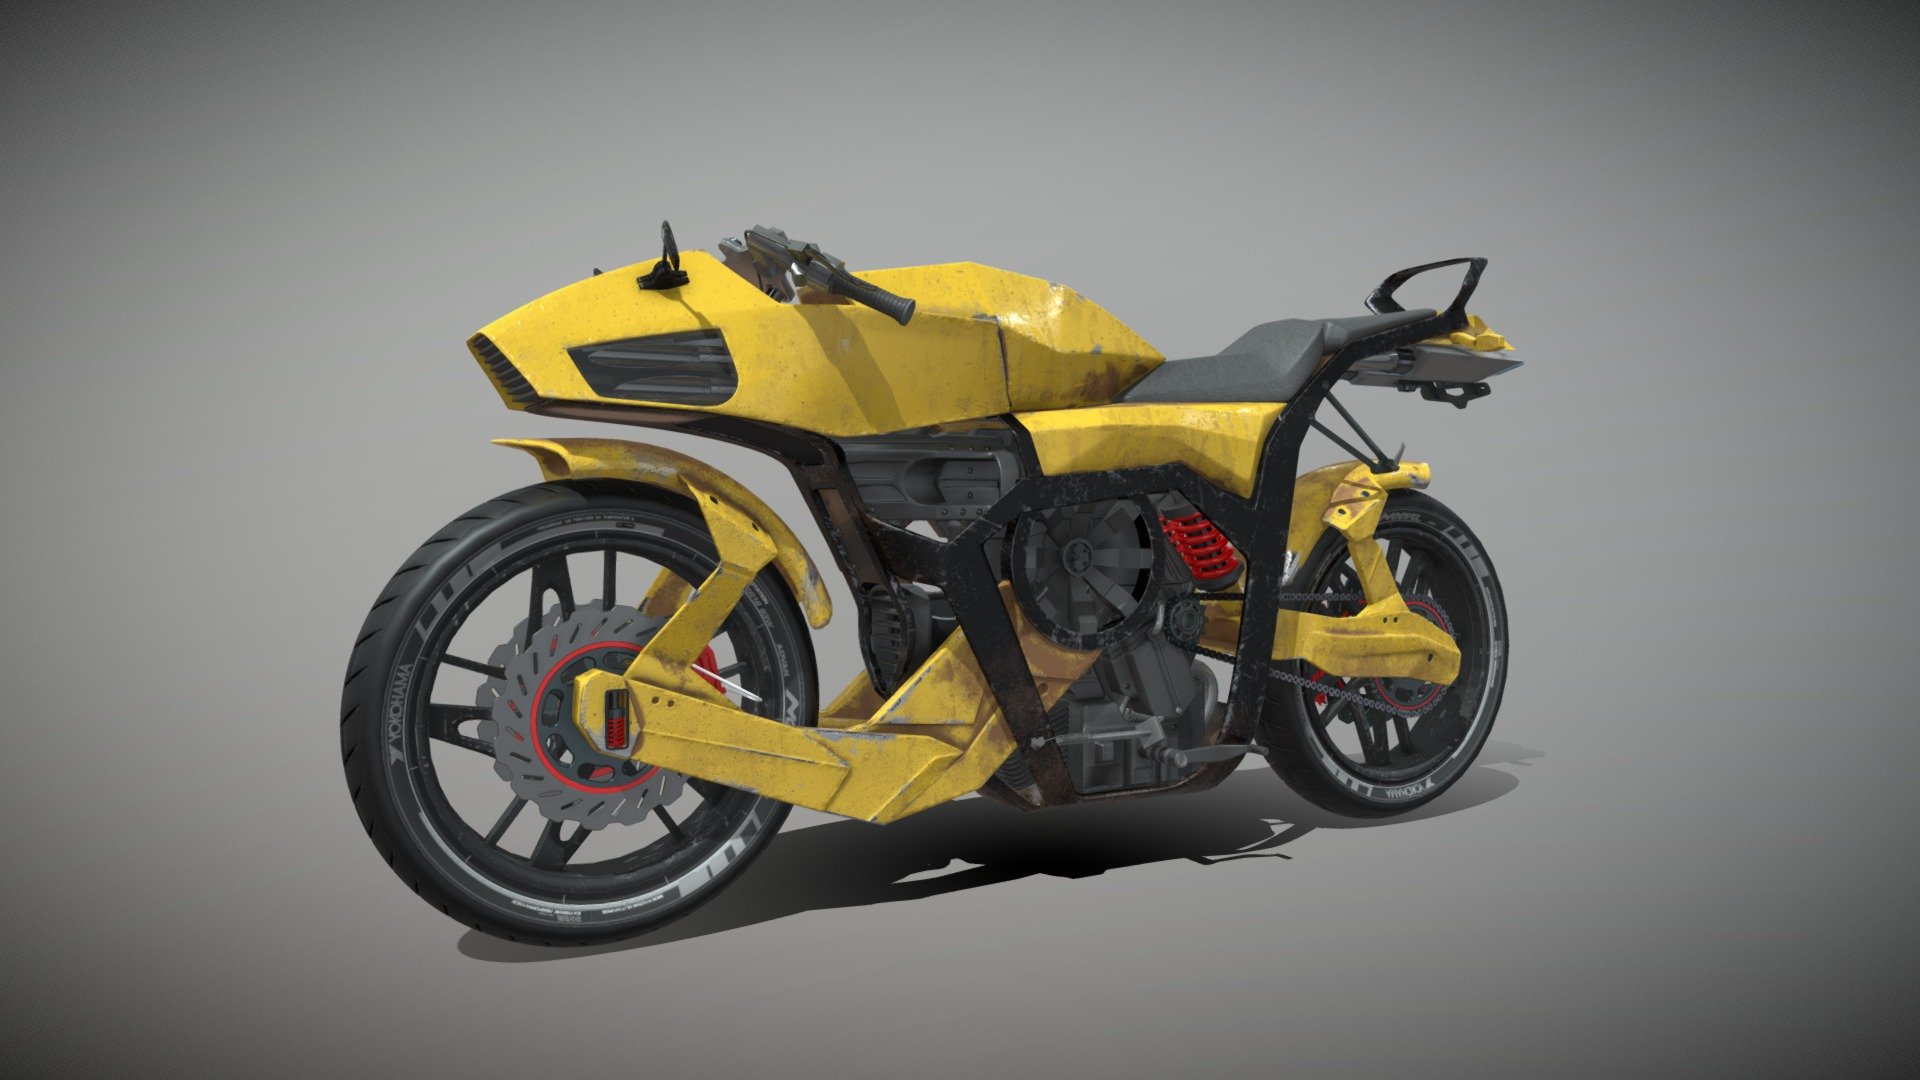 I fully designed this motorcycle as an exercice of design. This model has nothing to do with any design team. The UV are developed, the motorbike is accountable with any game engine or other 3D software. High quality polygonal model -Models resolutions are optimized for polygon efficiency.
Details about the project : 
https://www.behance.net/gallery/96956243/Futuristic-motorcycle

Animation :
- Shock absorbers are functional
- The bike can turn
- The wheels turn, the chain too

Creating a design from scratch takes way more time than reproducing an existing one. This is why prices are a bit higher than some other products. The advantage is that my designs are royalty free, that means you can use it in any support 3d model